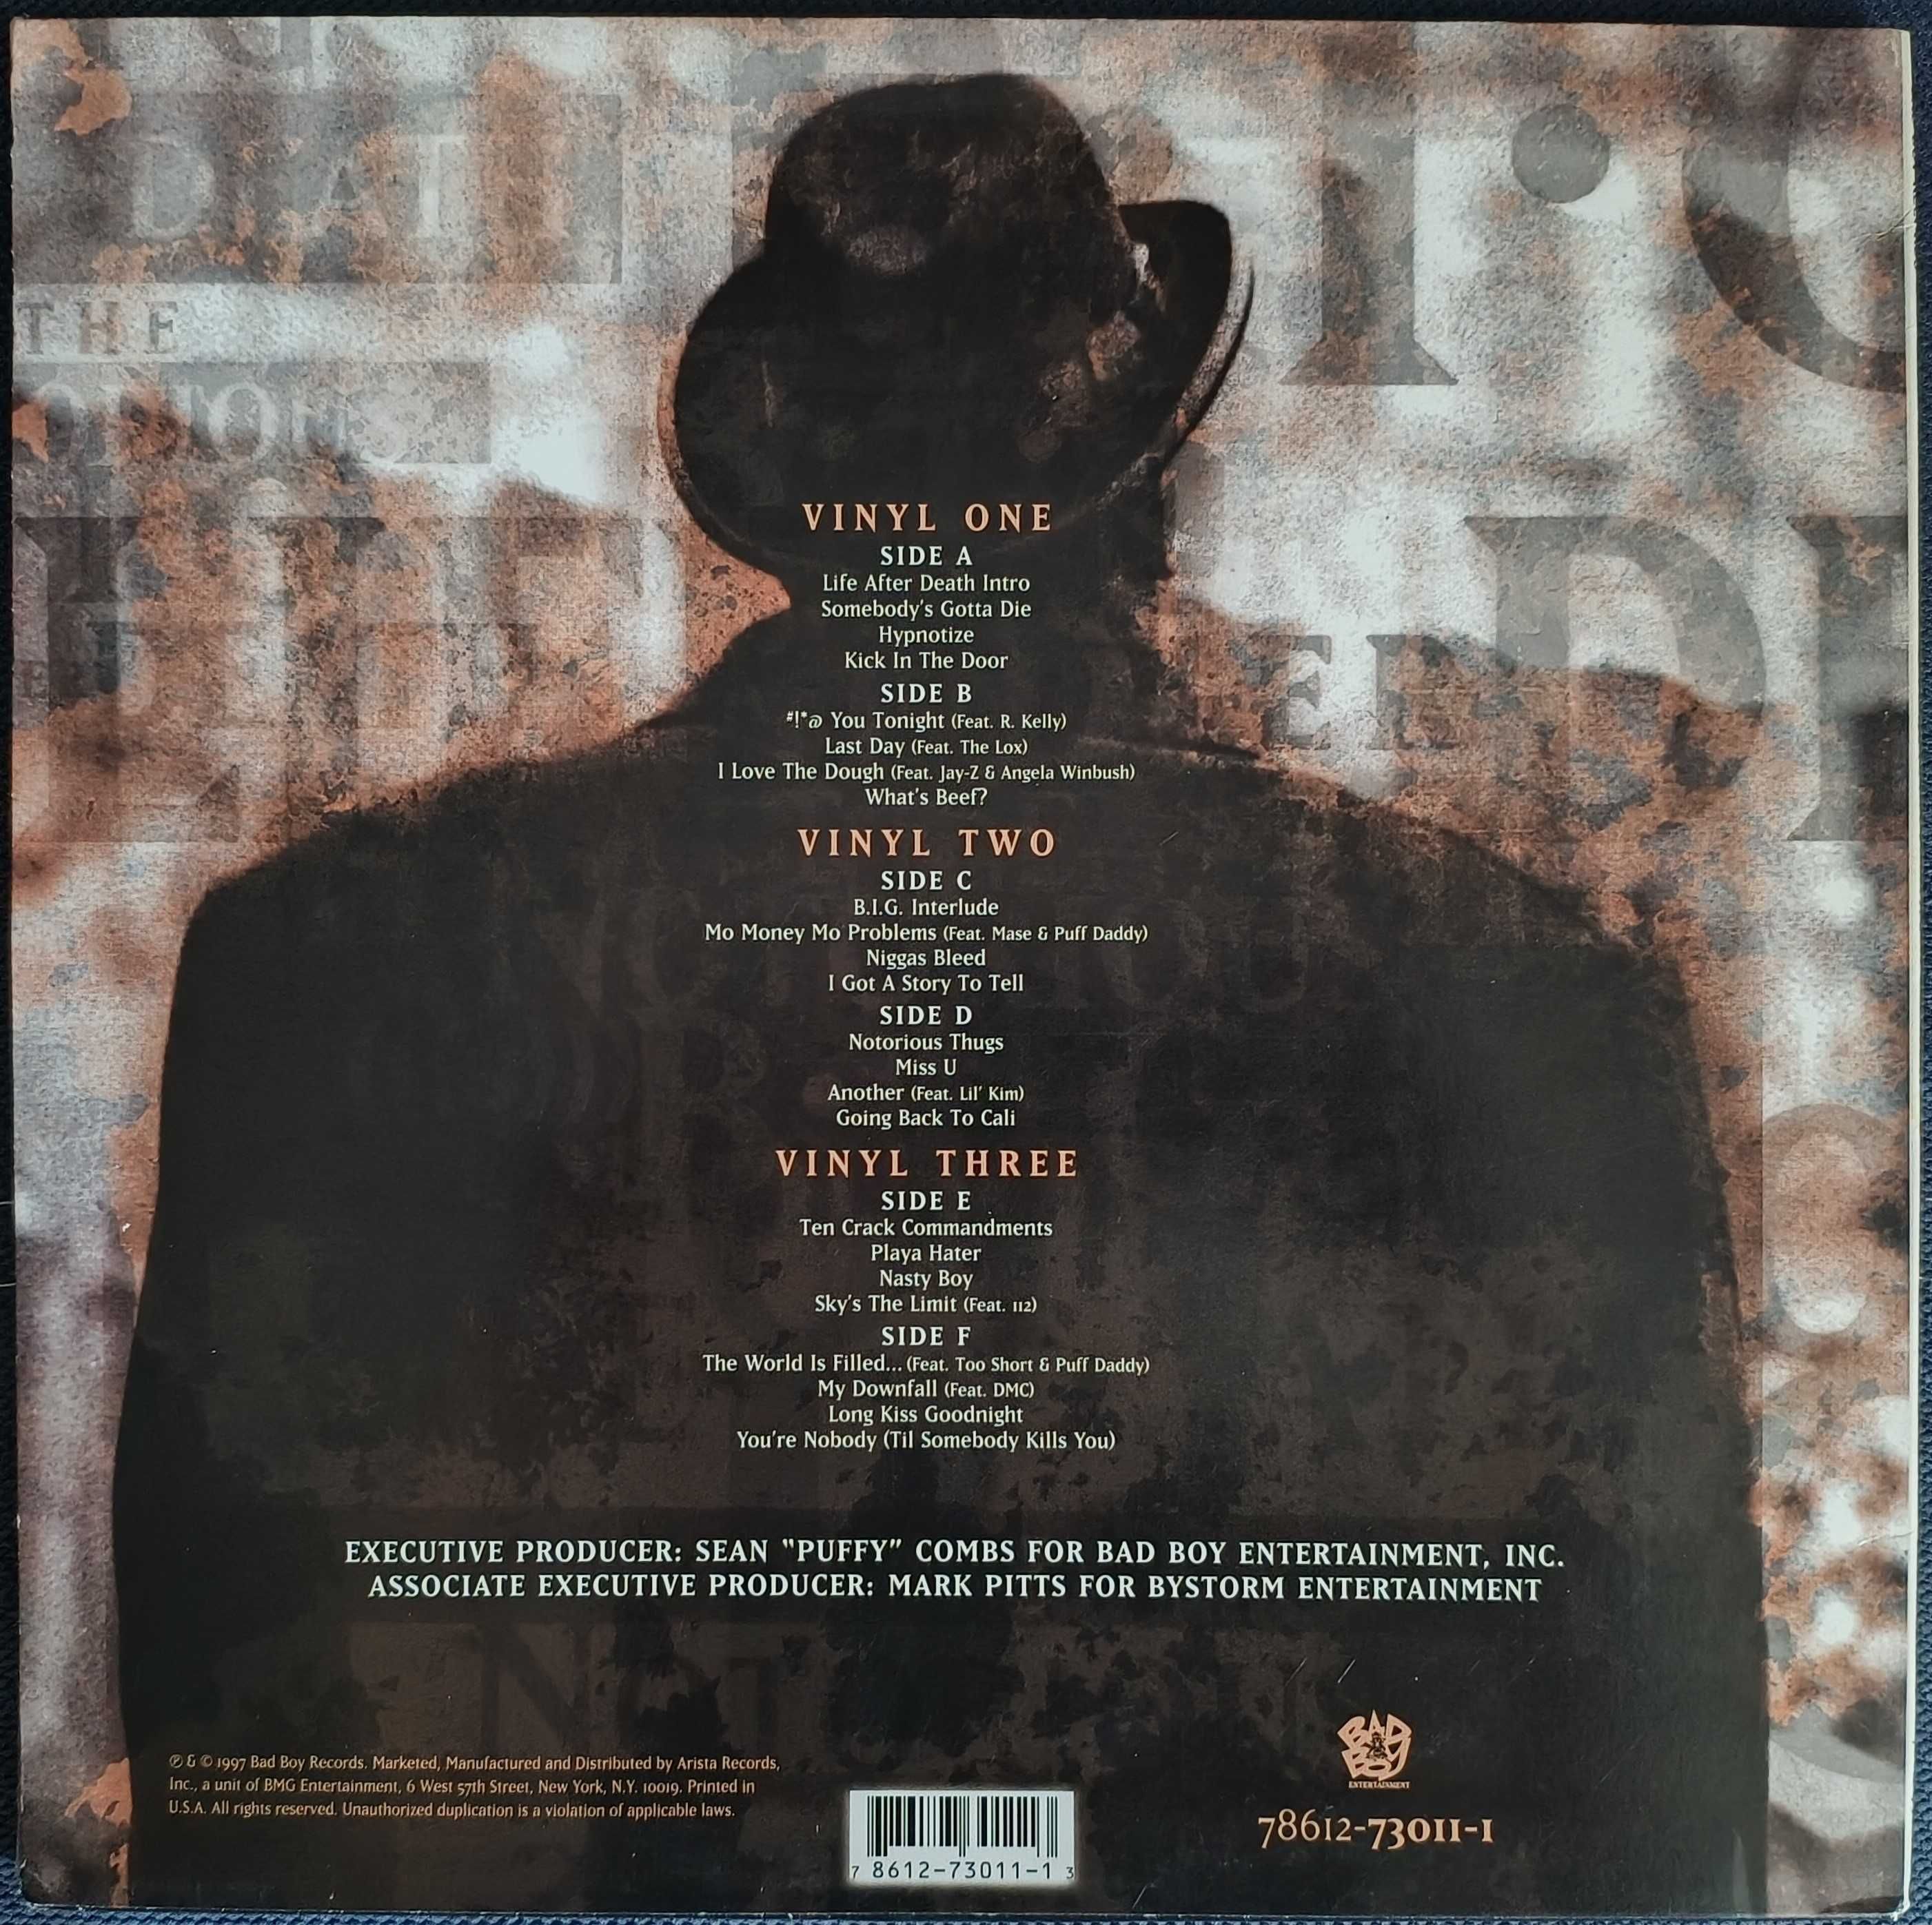 The Notorious B.I.G. - Life After Death [1Press, US 1997, 3Lp]